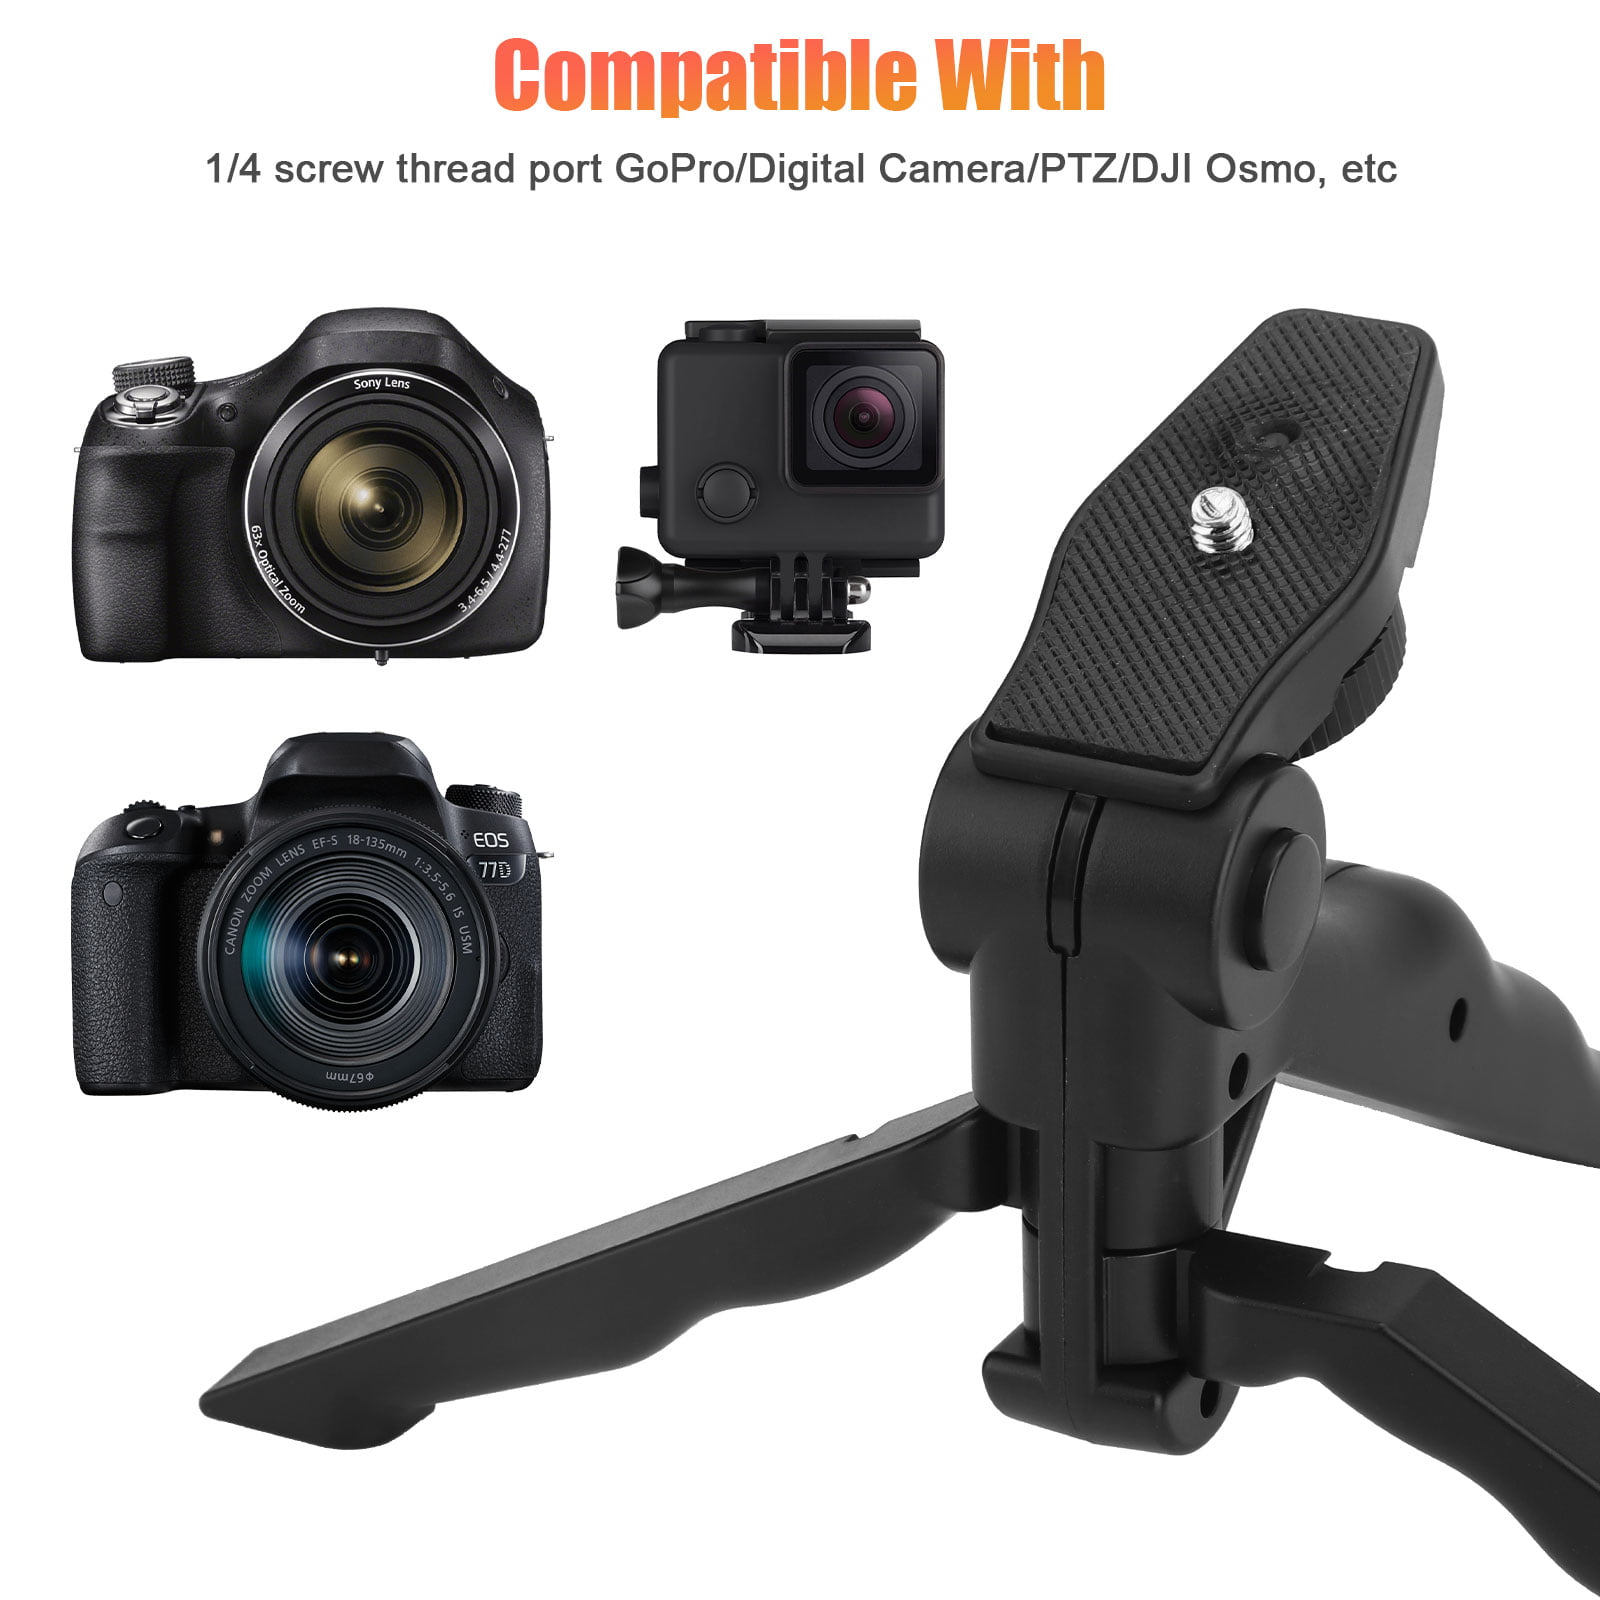 Portable Handheld Tripod Kit for iPhone Android Phone Compact Camera Camcorder DJI Osmo Mobile 2 Stabilizer GoPro Hero8 Action Camera Mini Projector & More JJC Deluxe Mini Phone Tabletop Tripod Stand 